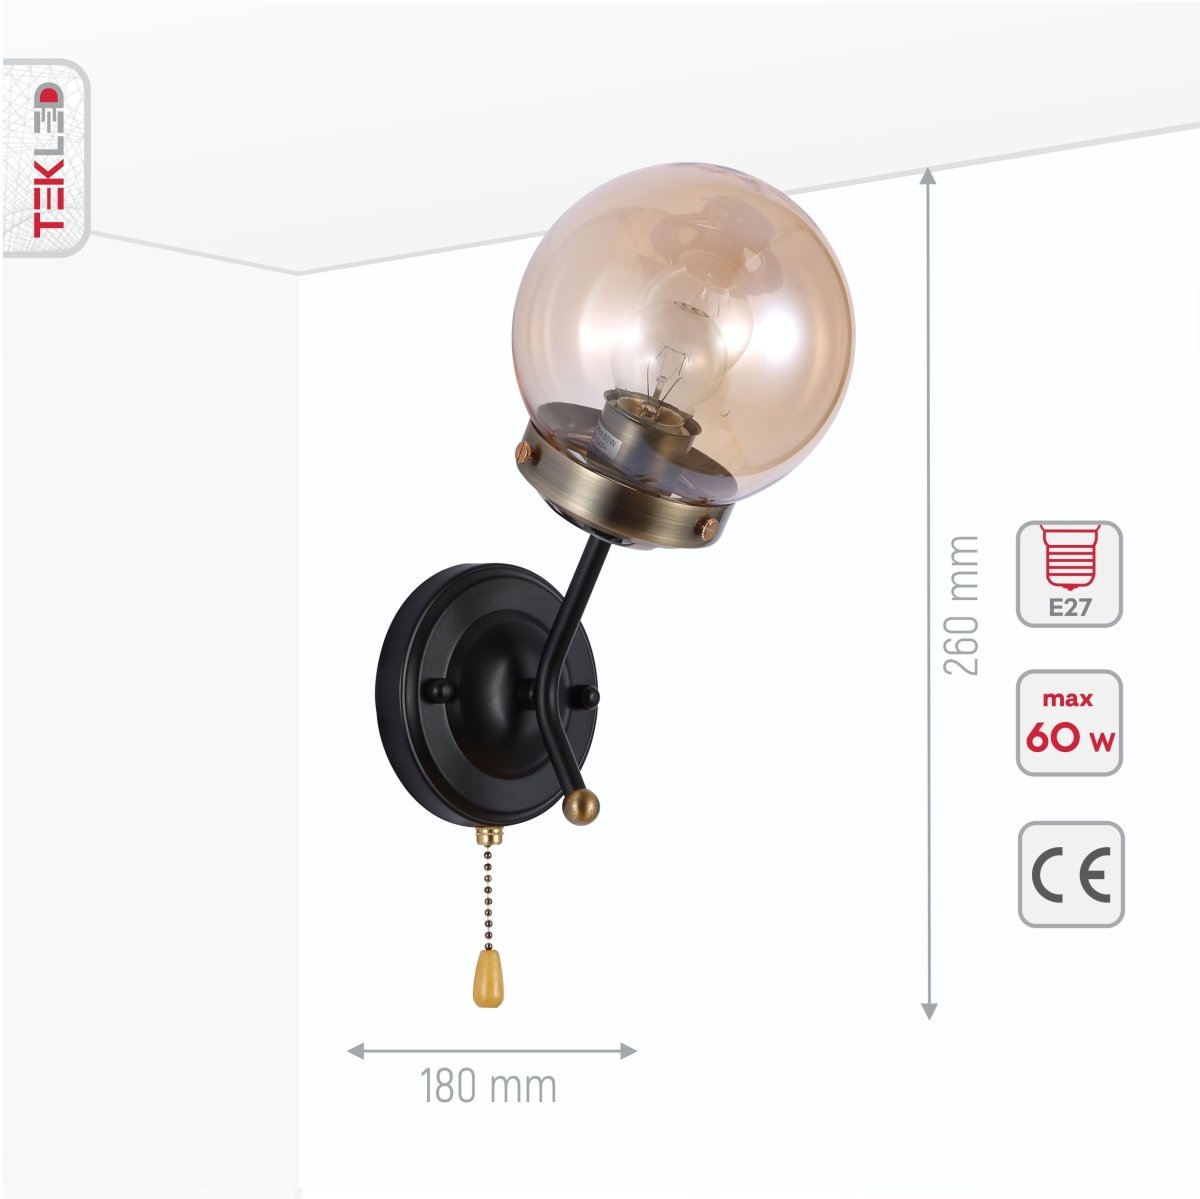 Product dimensions of amber glass antique brass and black globe wall light e27 and pull down switch